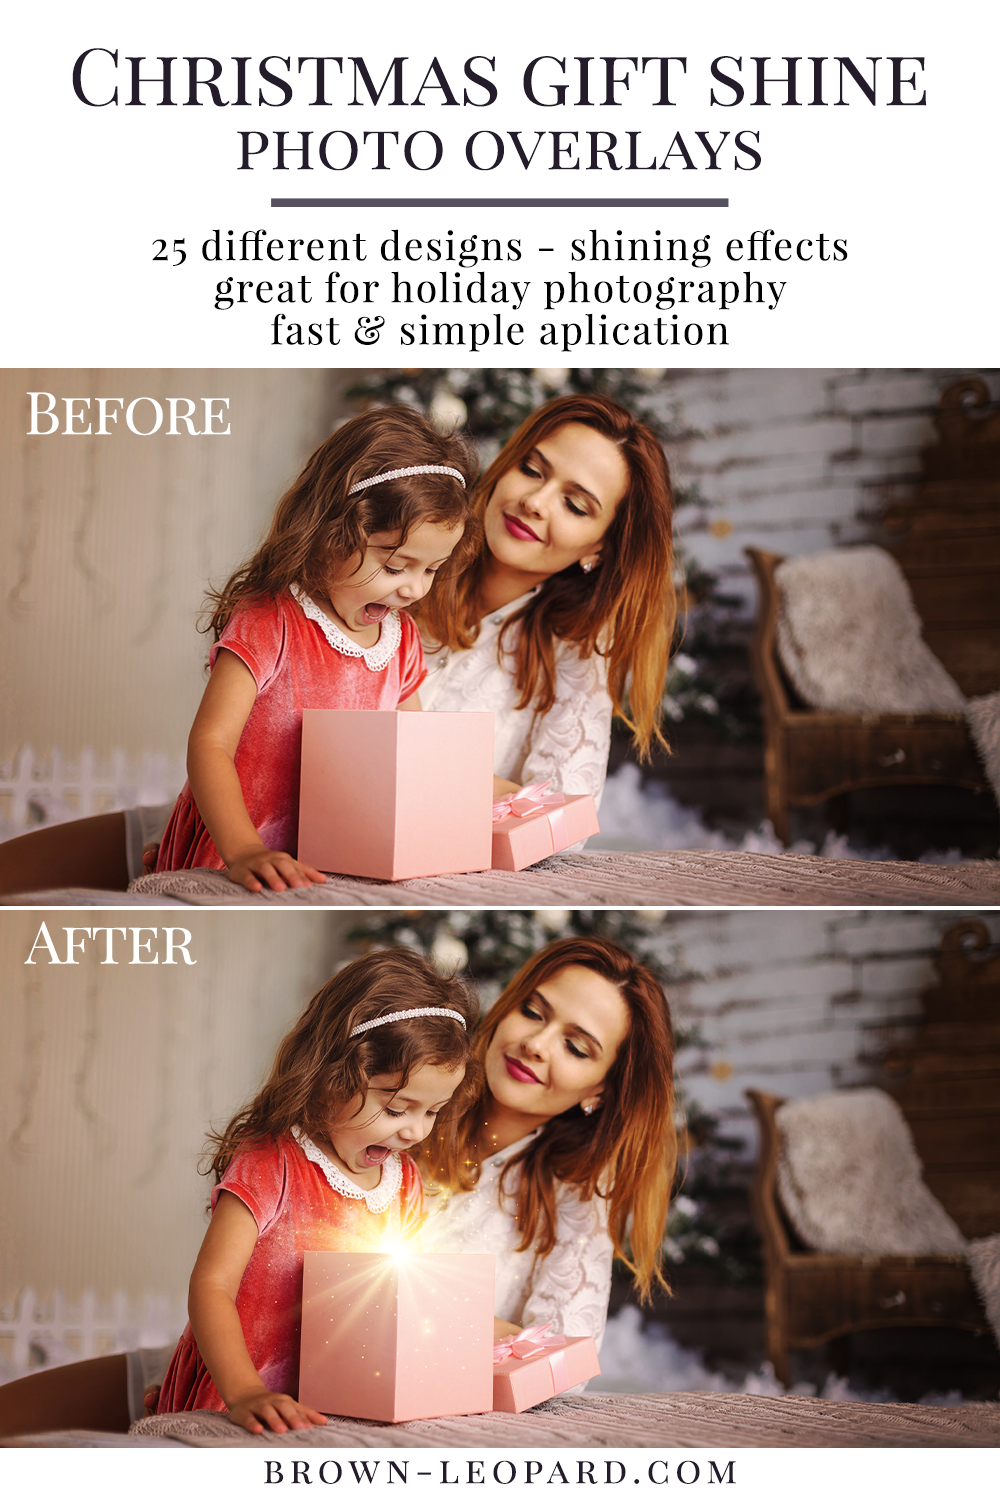 Enhance your Christmas photography! 25 different styles of gift shine photo overlays. Great for mini sessions with kids & families. Drag & drop - super easy to use, fast and simple. Original results just in few seconds. Professional Christmas photo overlays for Photoshop, Gimp, PicMoneky, Canva, etc. Photo overlays for creative photographers from Brown Leopard.